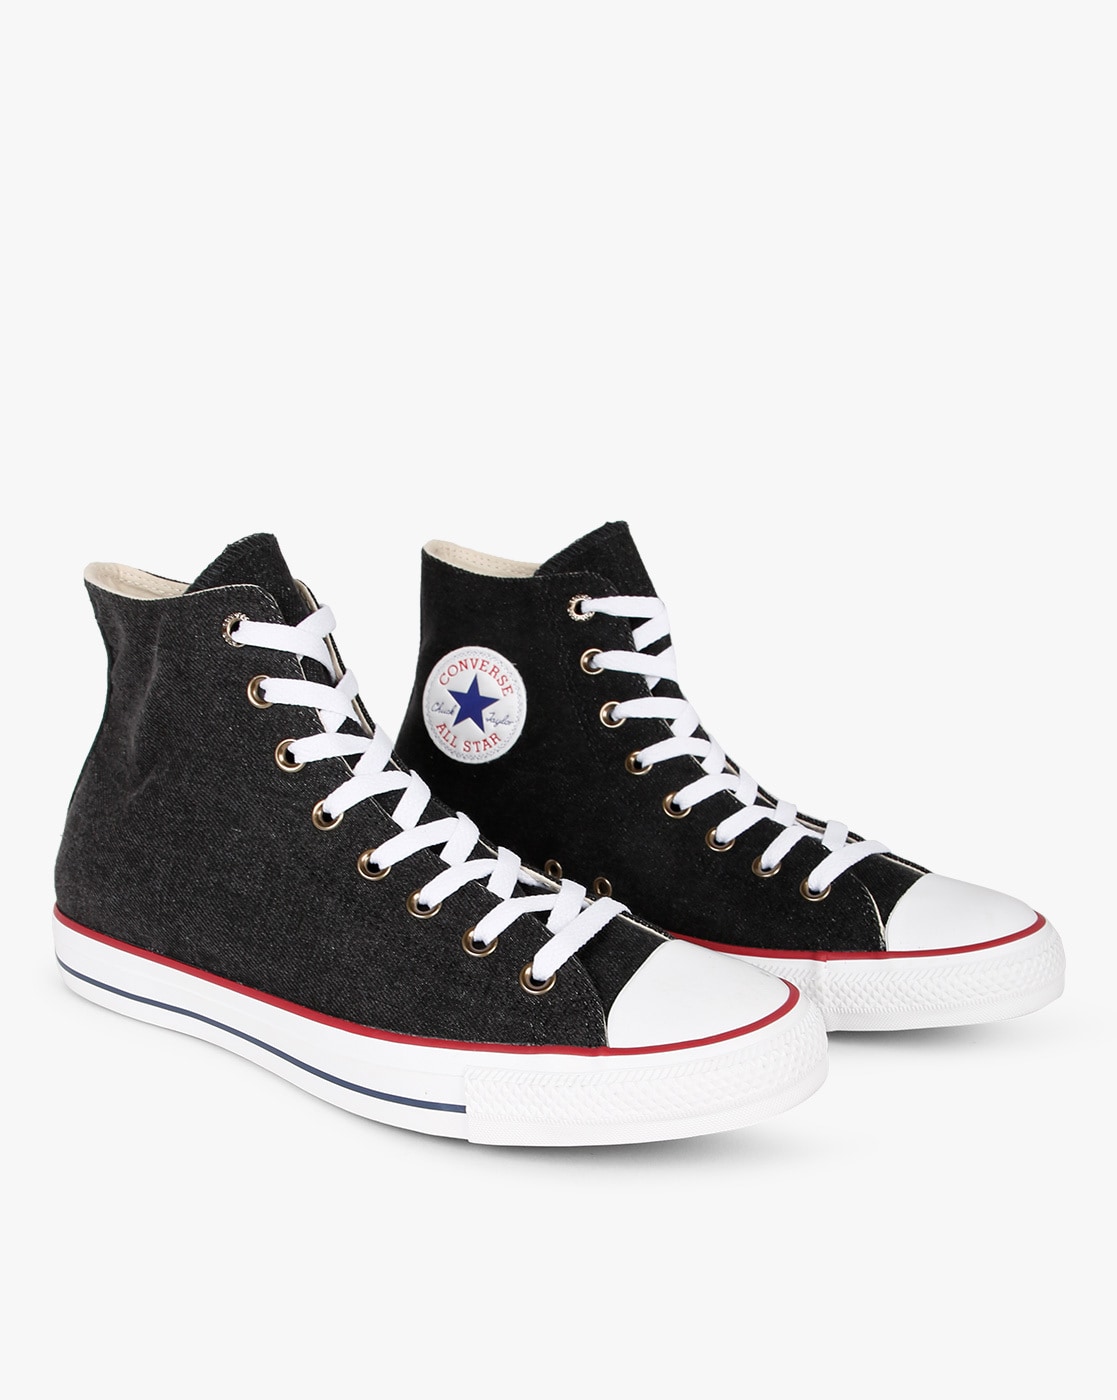 converse all star online shopping